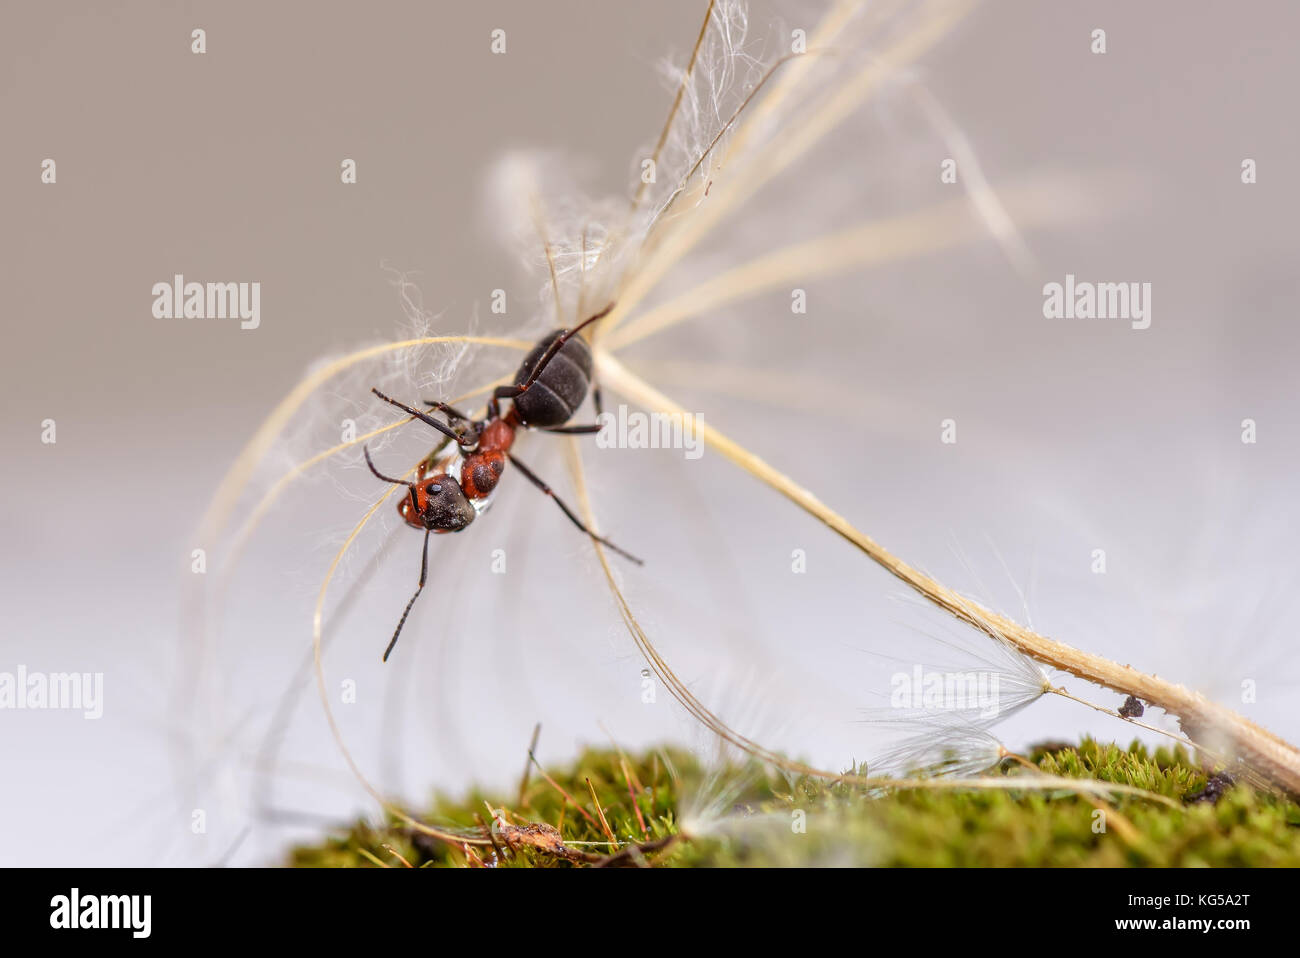 Natural animal background with red ant close-up sitting on a seed of large dandelion Stock Photo